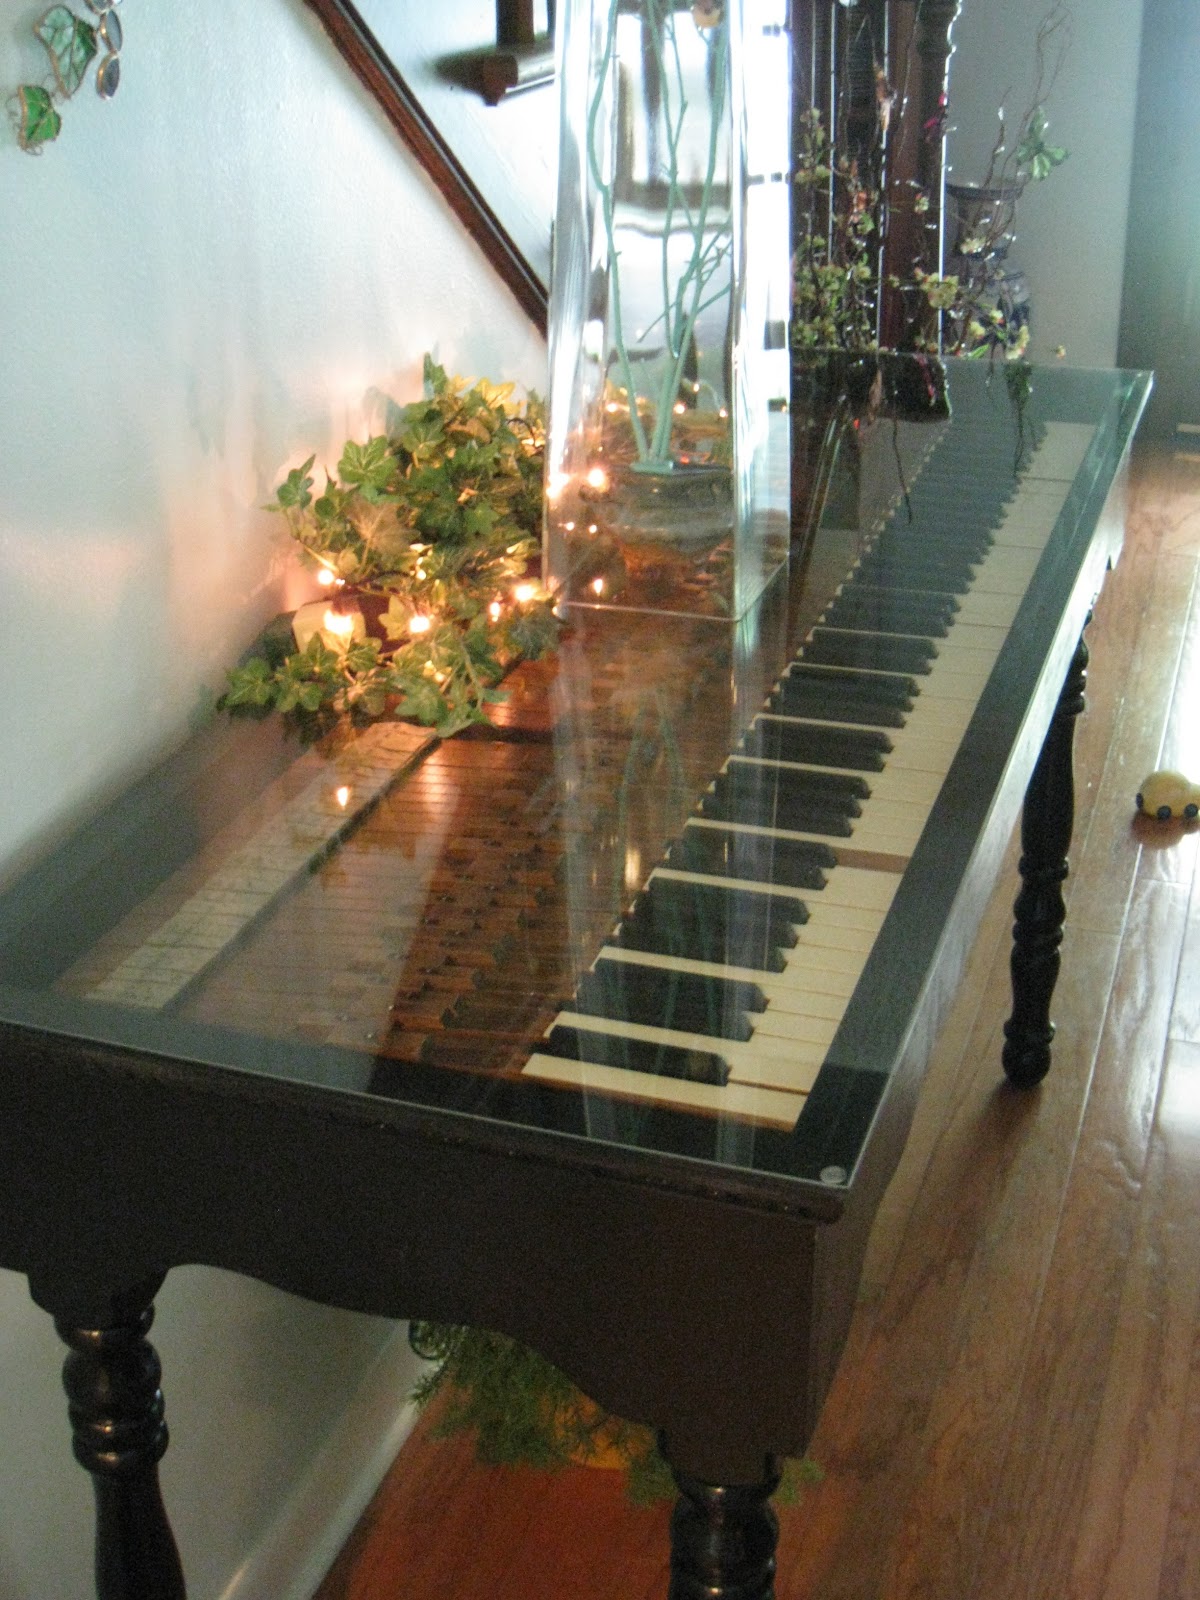 Repurposed For Life: Piano keyboard made into a table